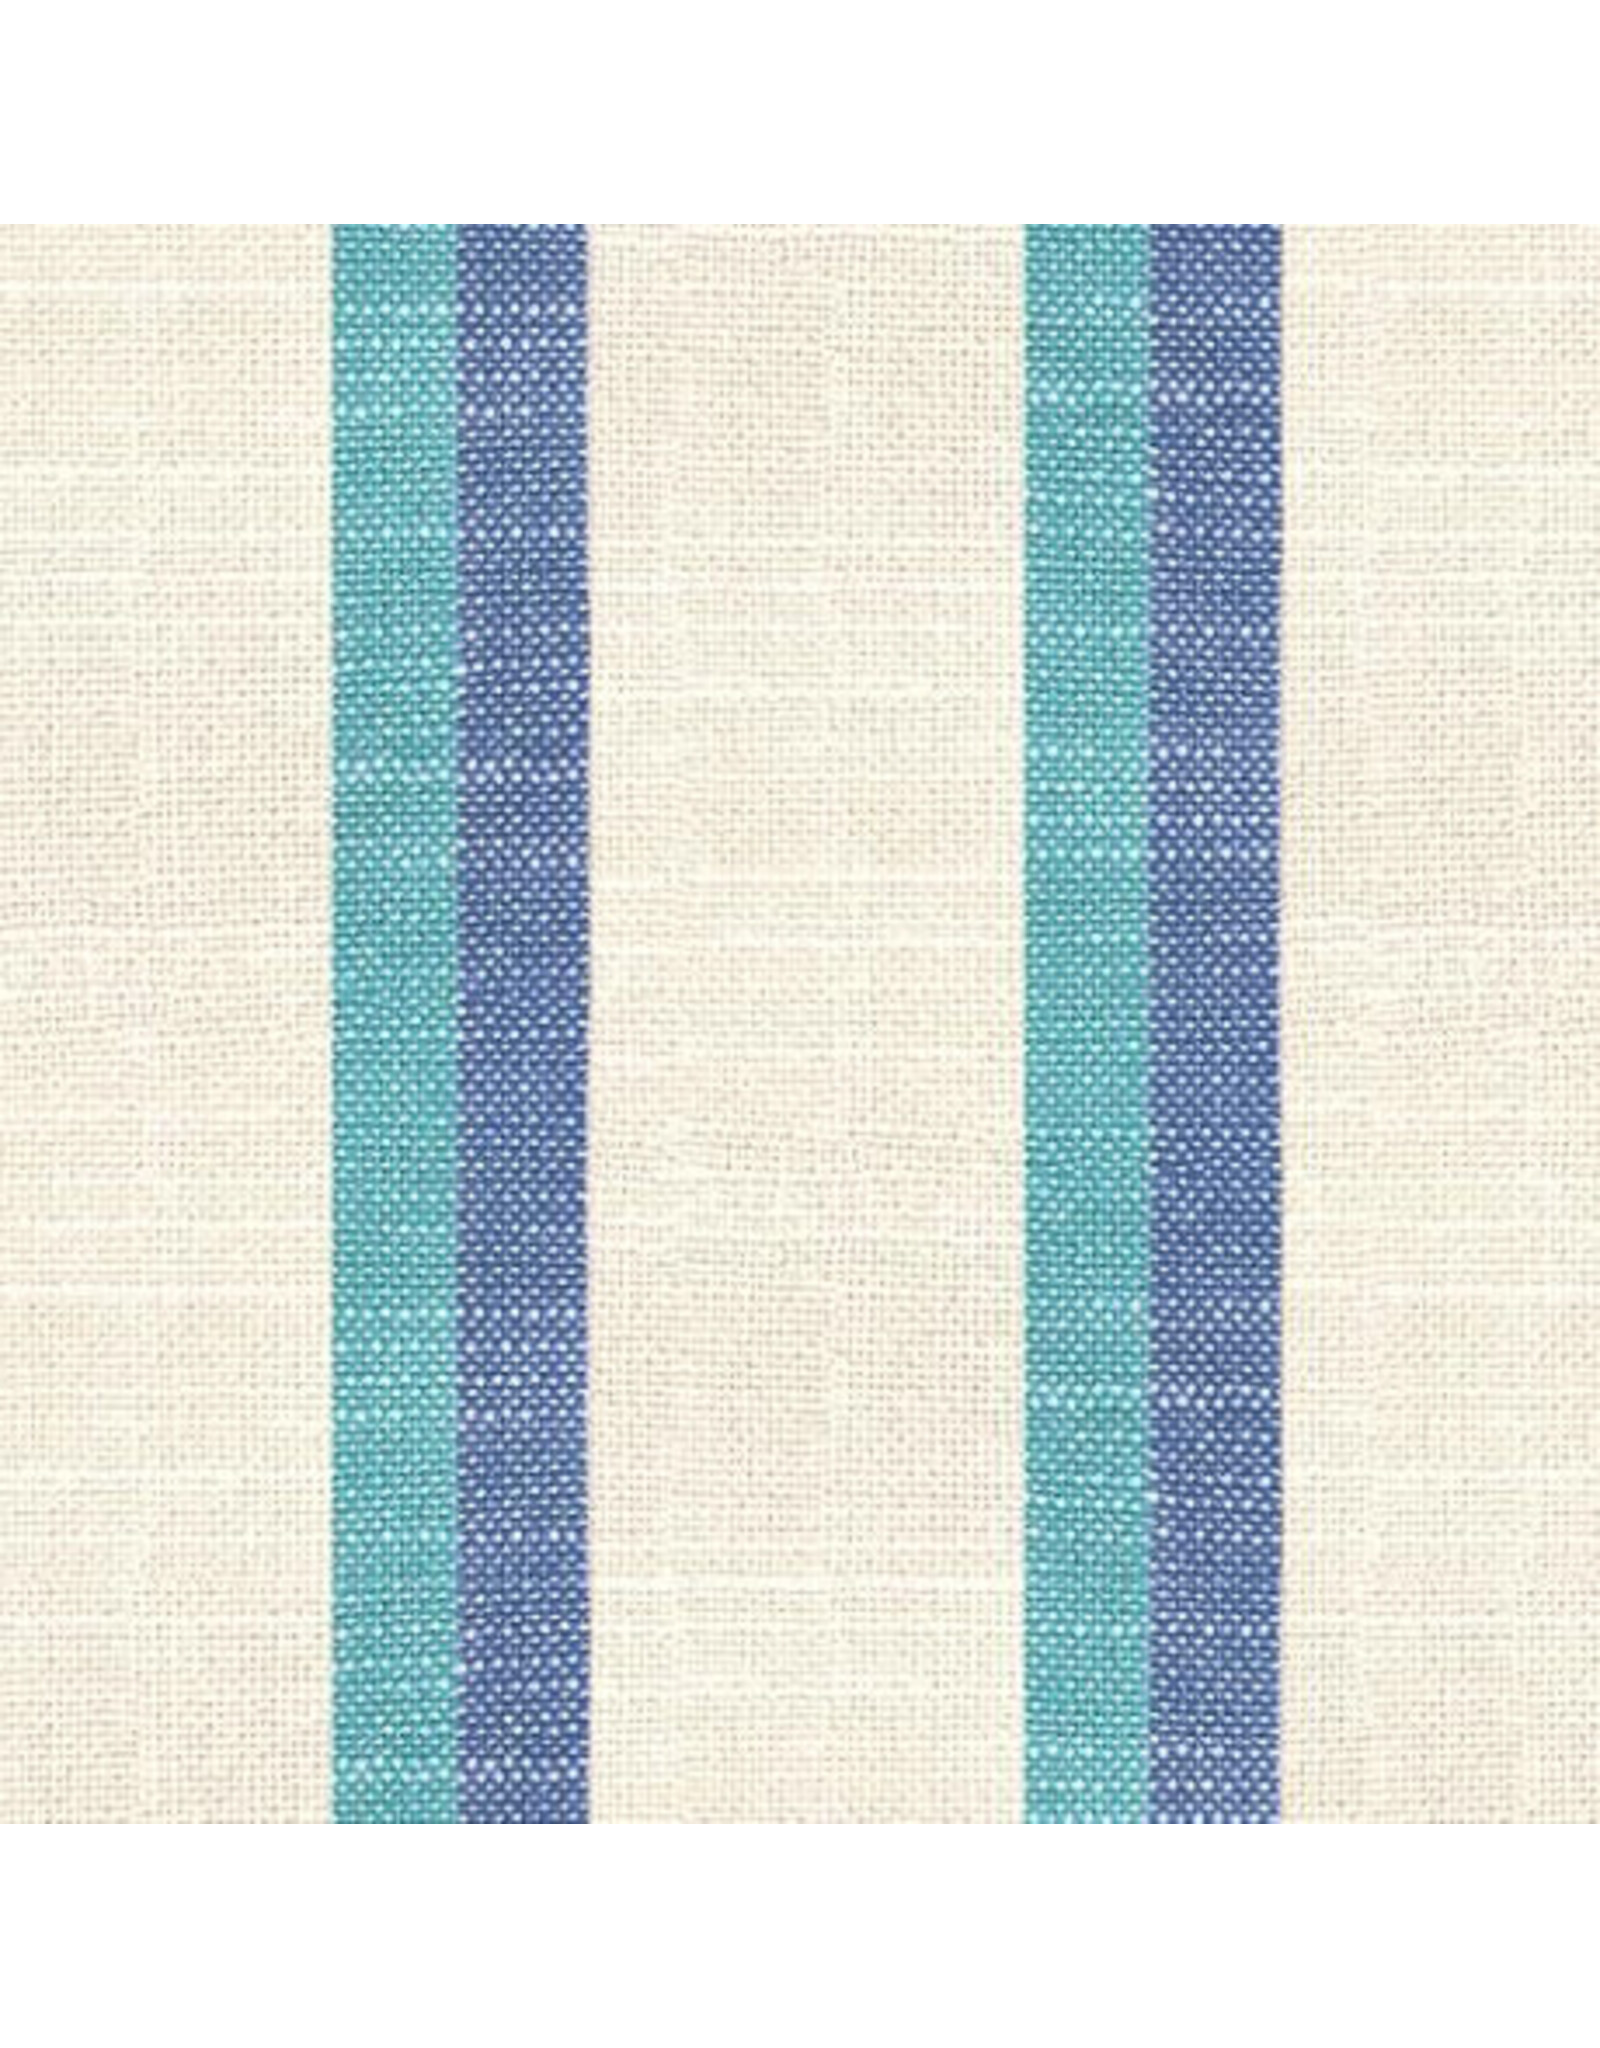 Alexia Abegg Jolie Toweling, Apron Stripe in Blue, 16" wide, sold by the yard